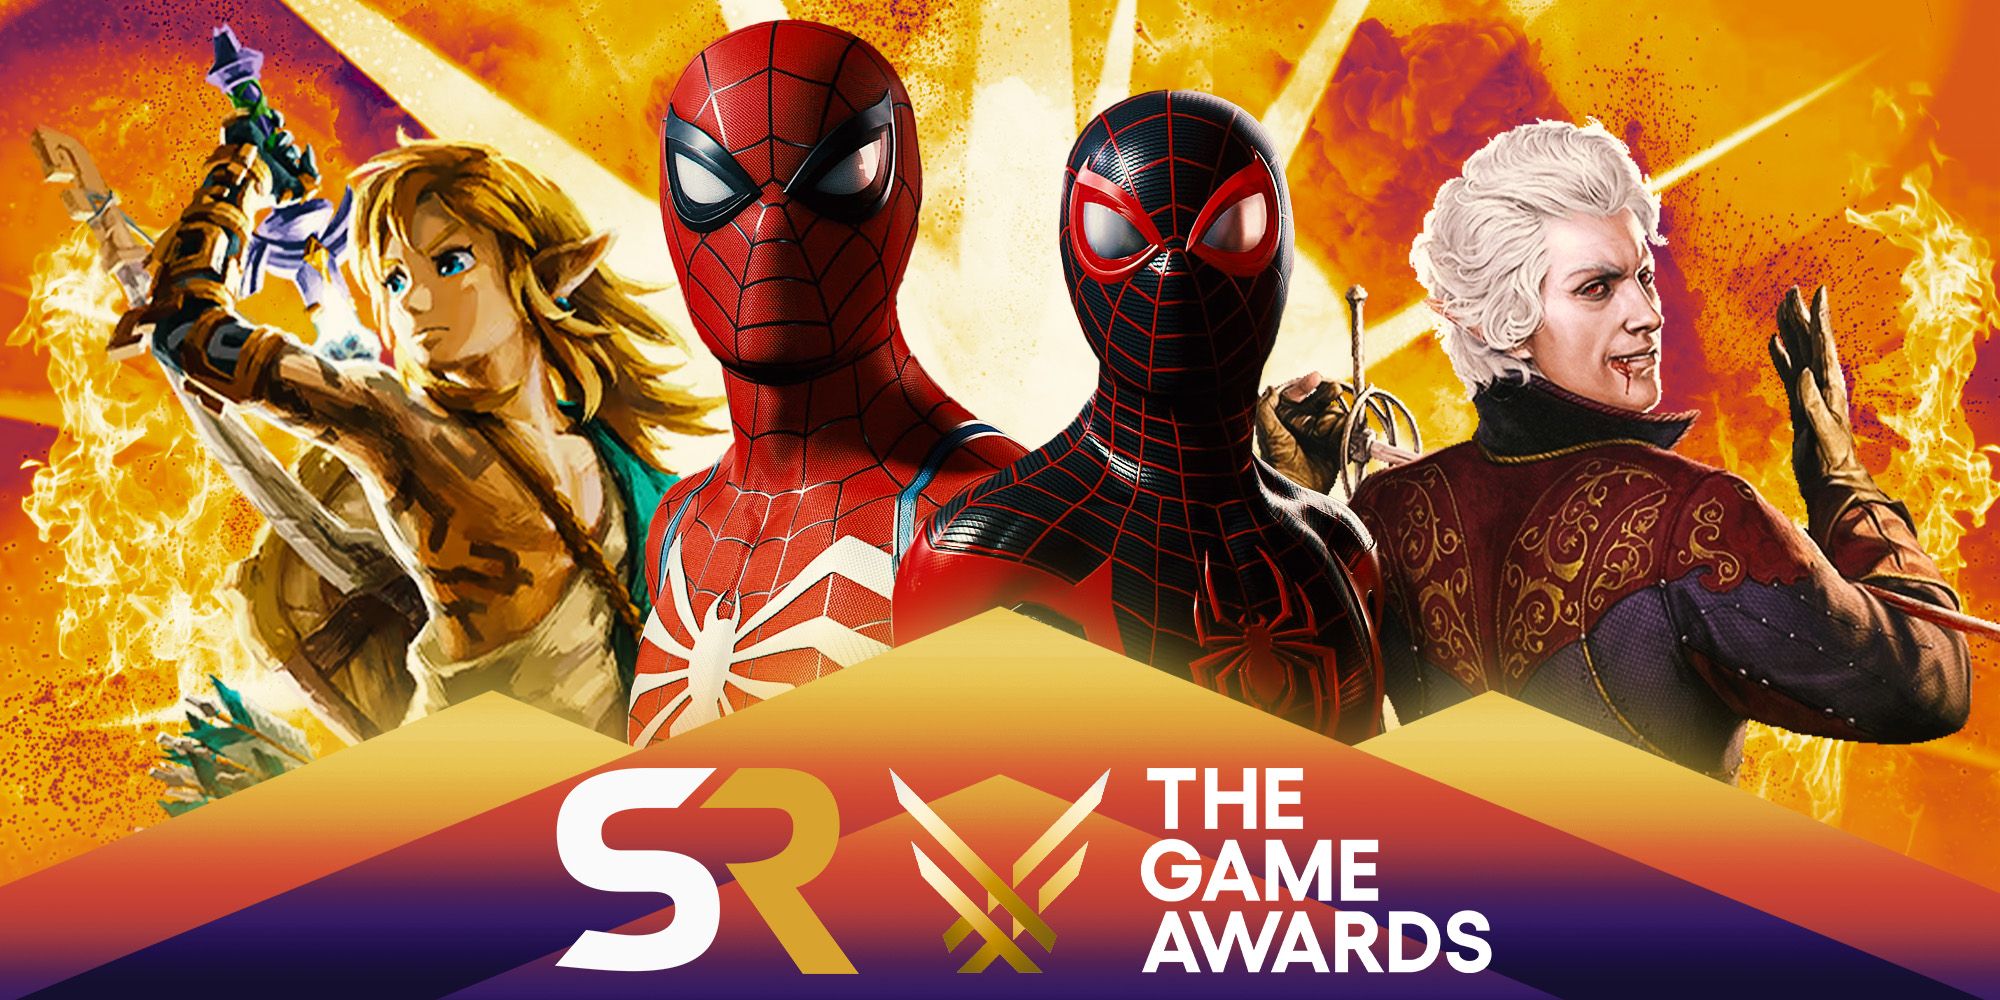 A colorful edit with Link from Zelda: Tears of the Kingdom to the left, both Peter Parker and Miles Morales from Marvel's Spider-Man 2 in the center, and Astarion from Baldur's Gate 3 to the right. At the bottom are the Screen Rant and The Game Awards logos.